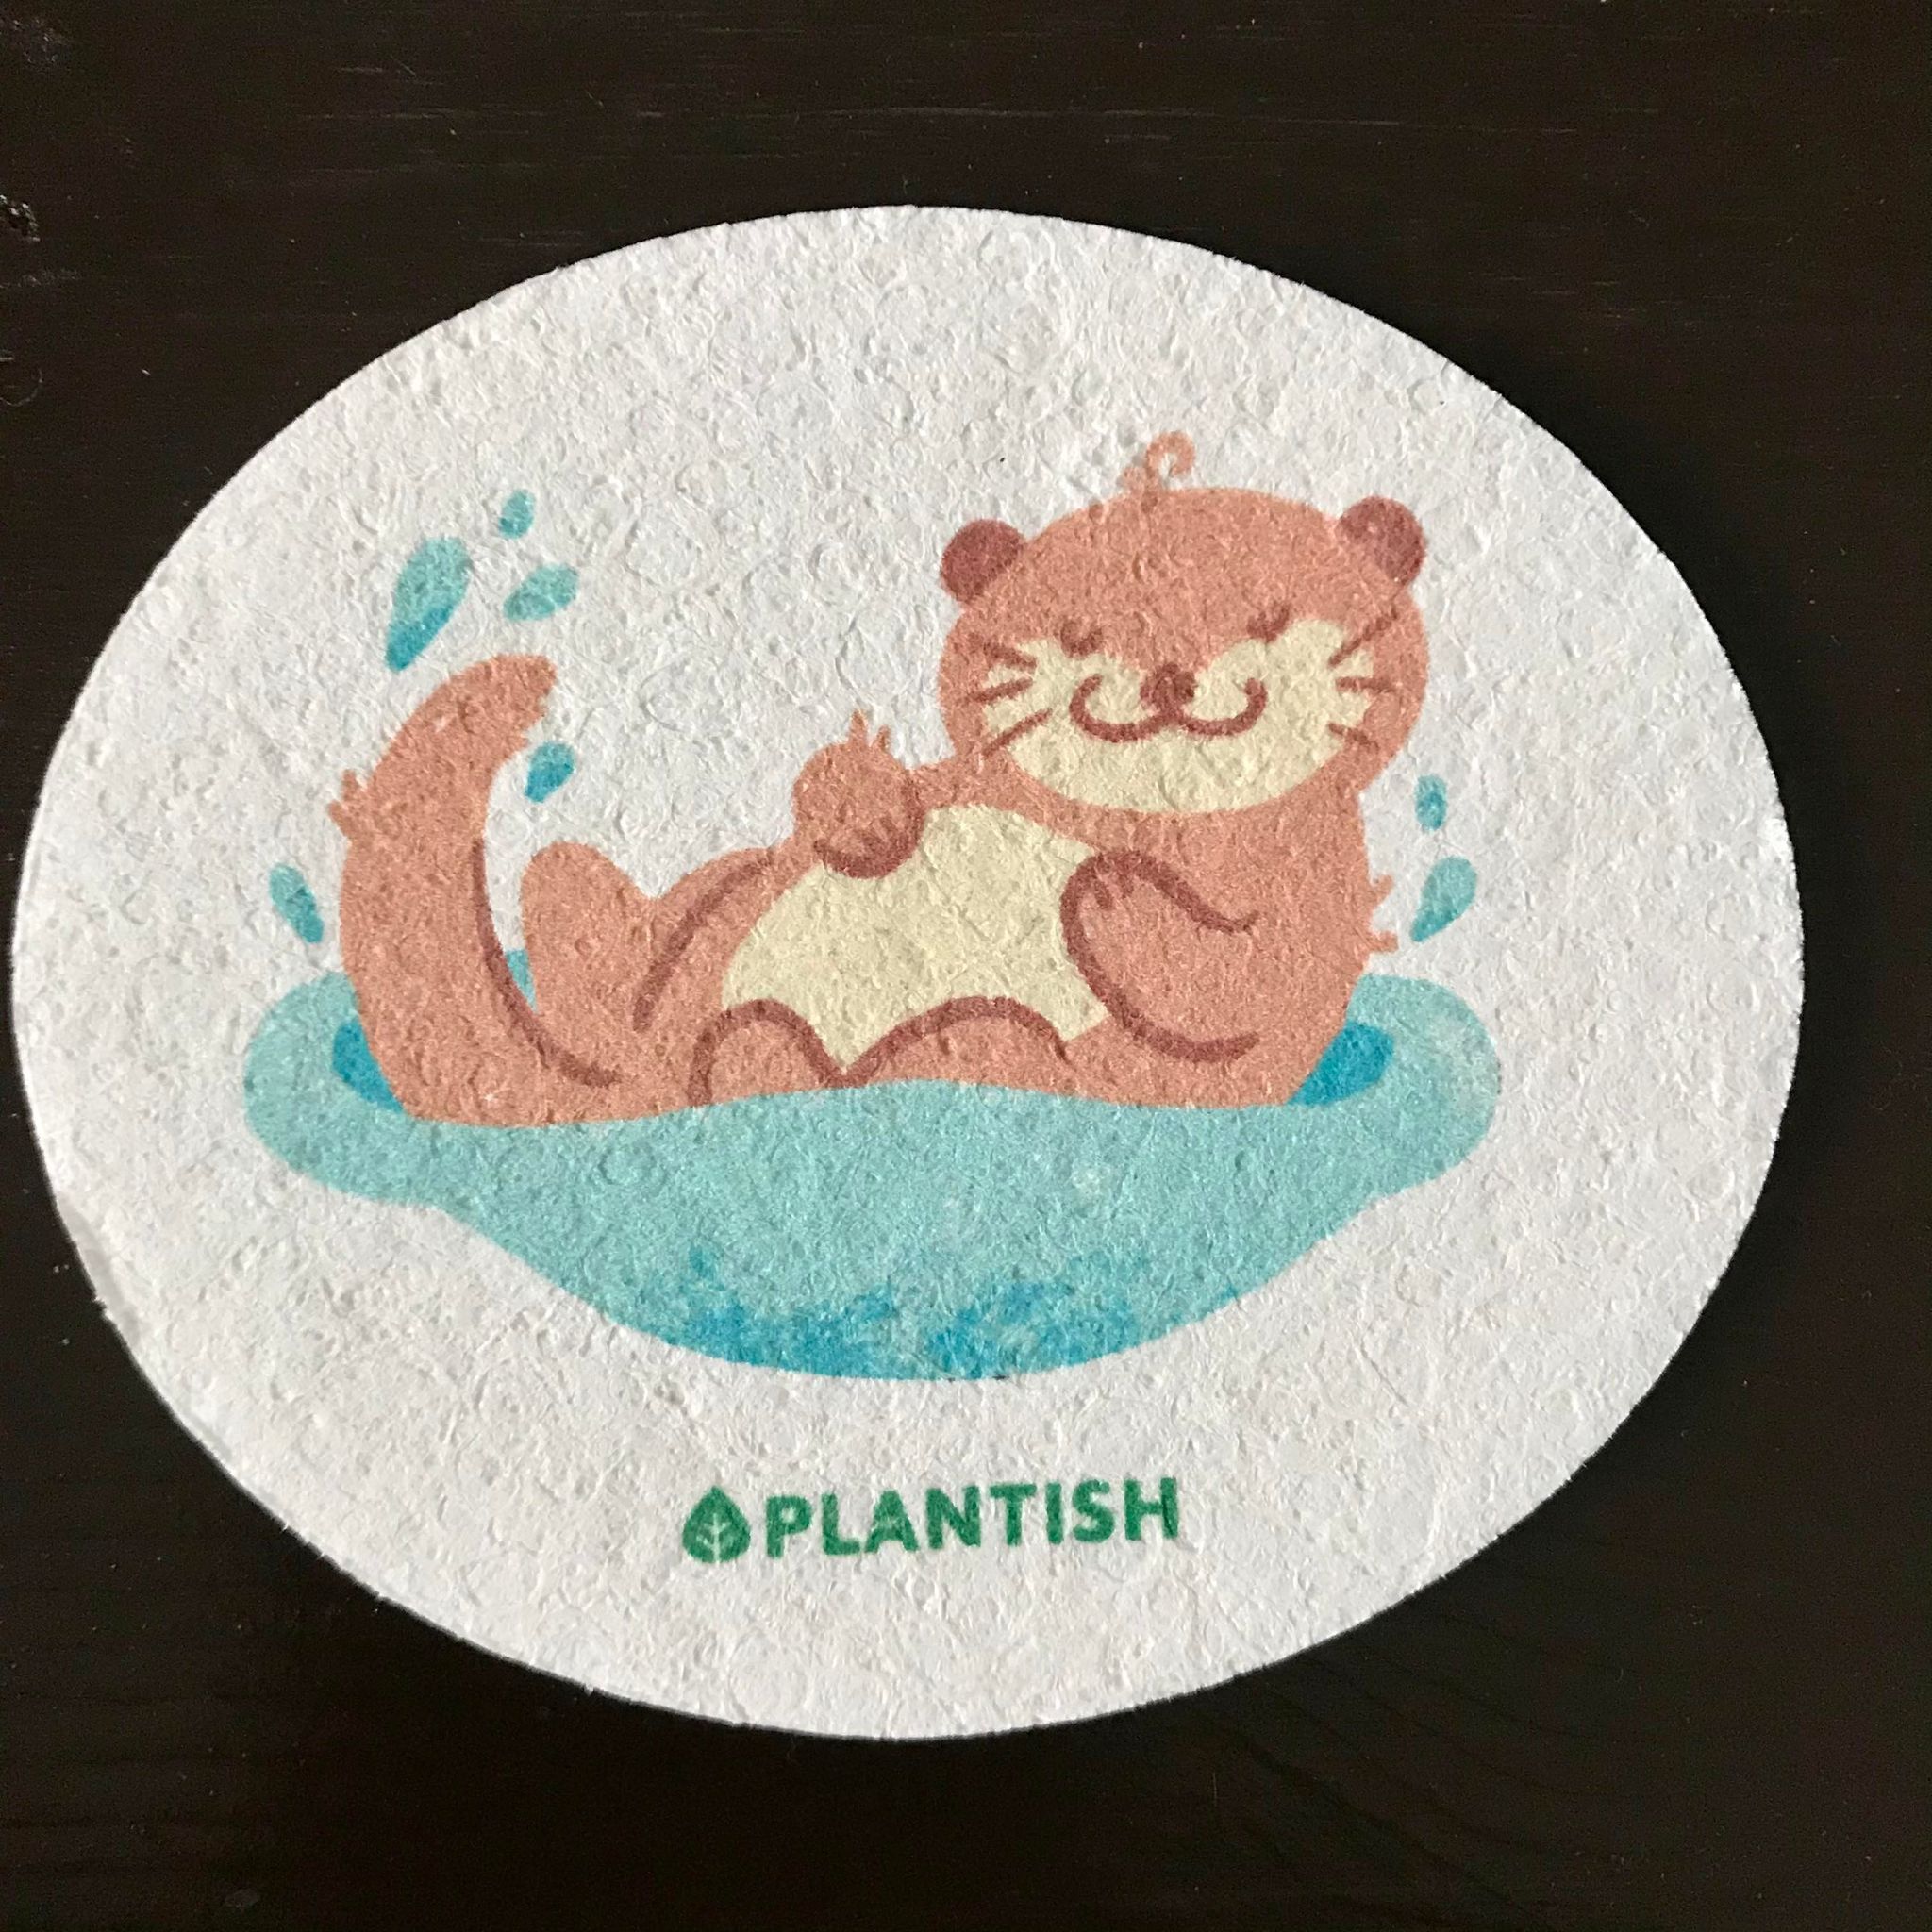 Encourage good hygiene with this sleepy otter eco sponge by Plantish that expands in water and can be composted at end of use